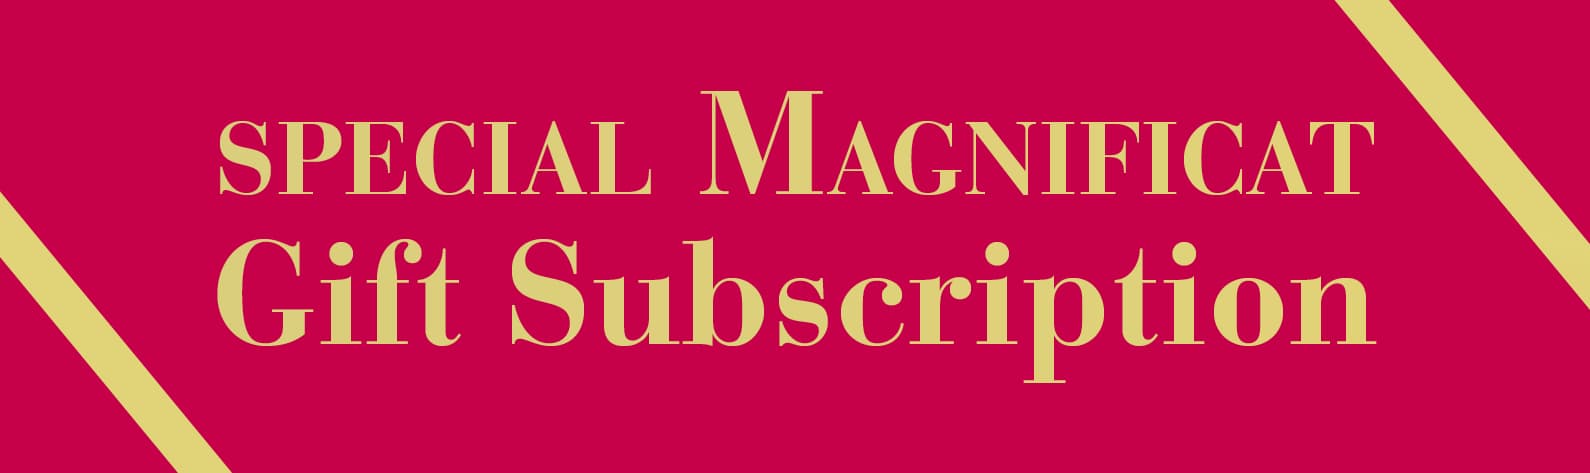 Special Magnificat Gift Subscription